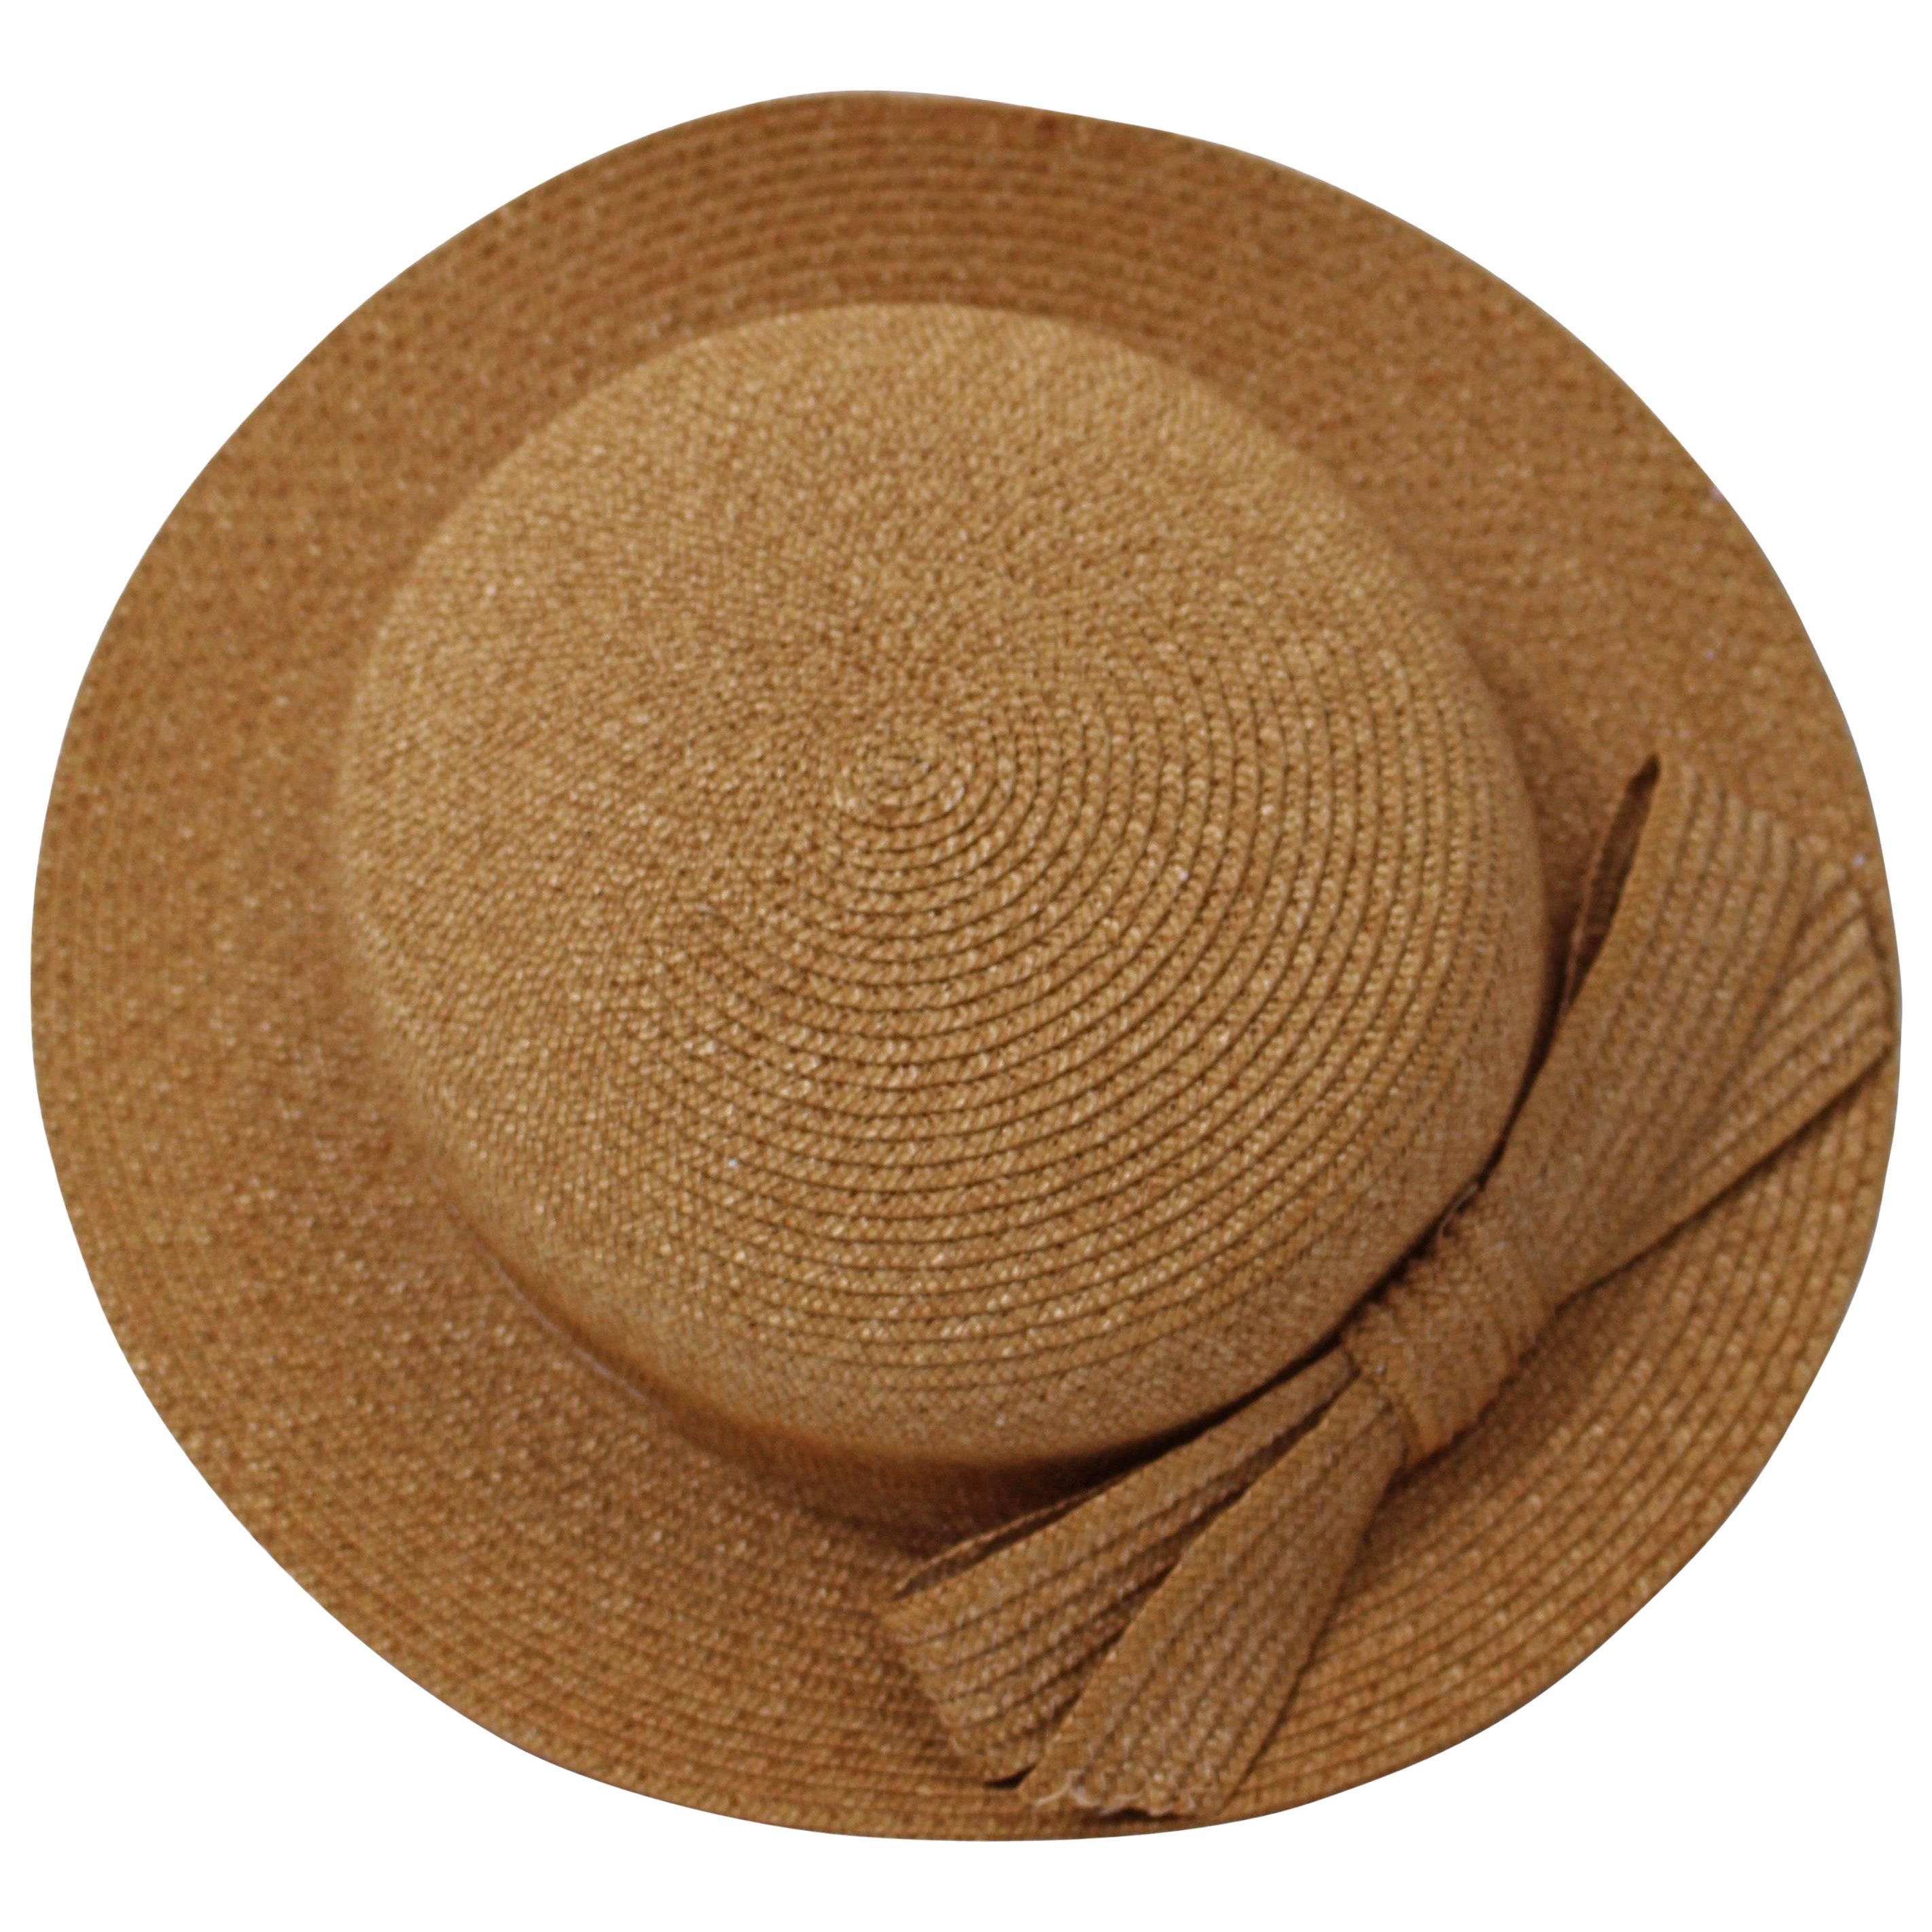 Vintage Emillio Pucci Woven Straw Tan Hat with Bow For Sale